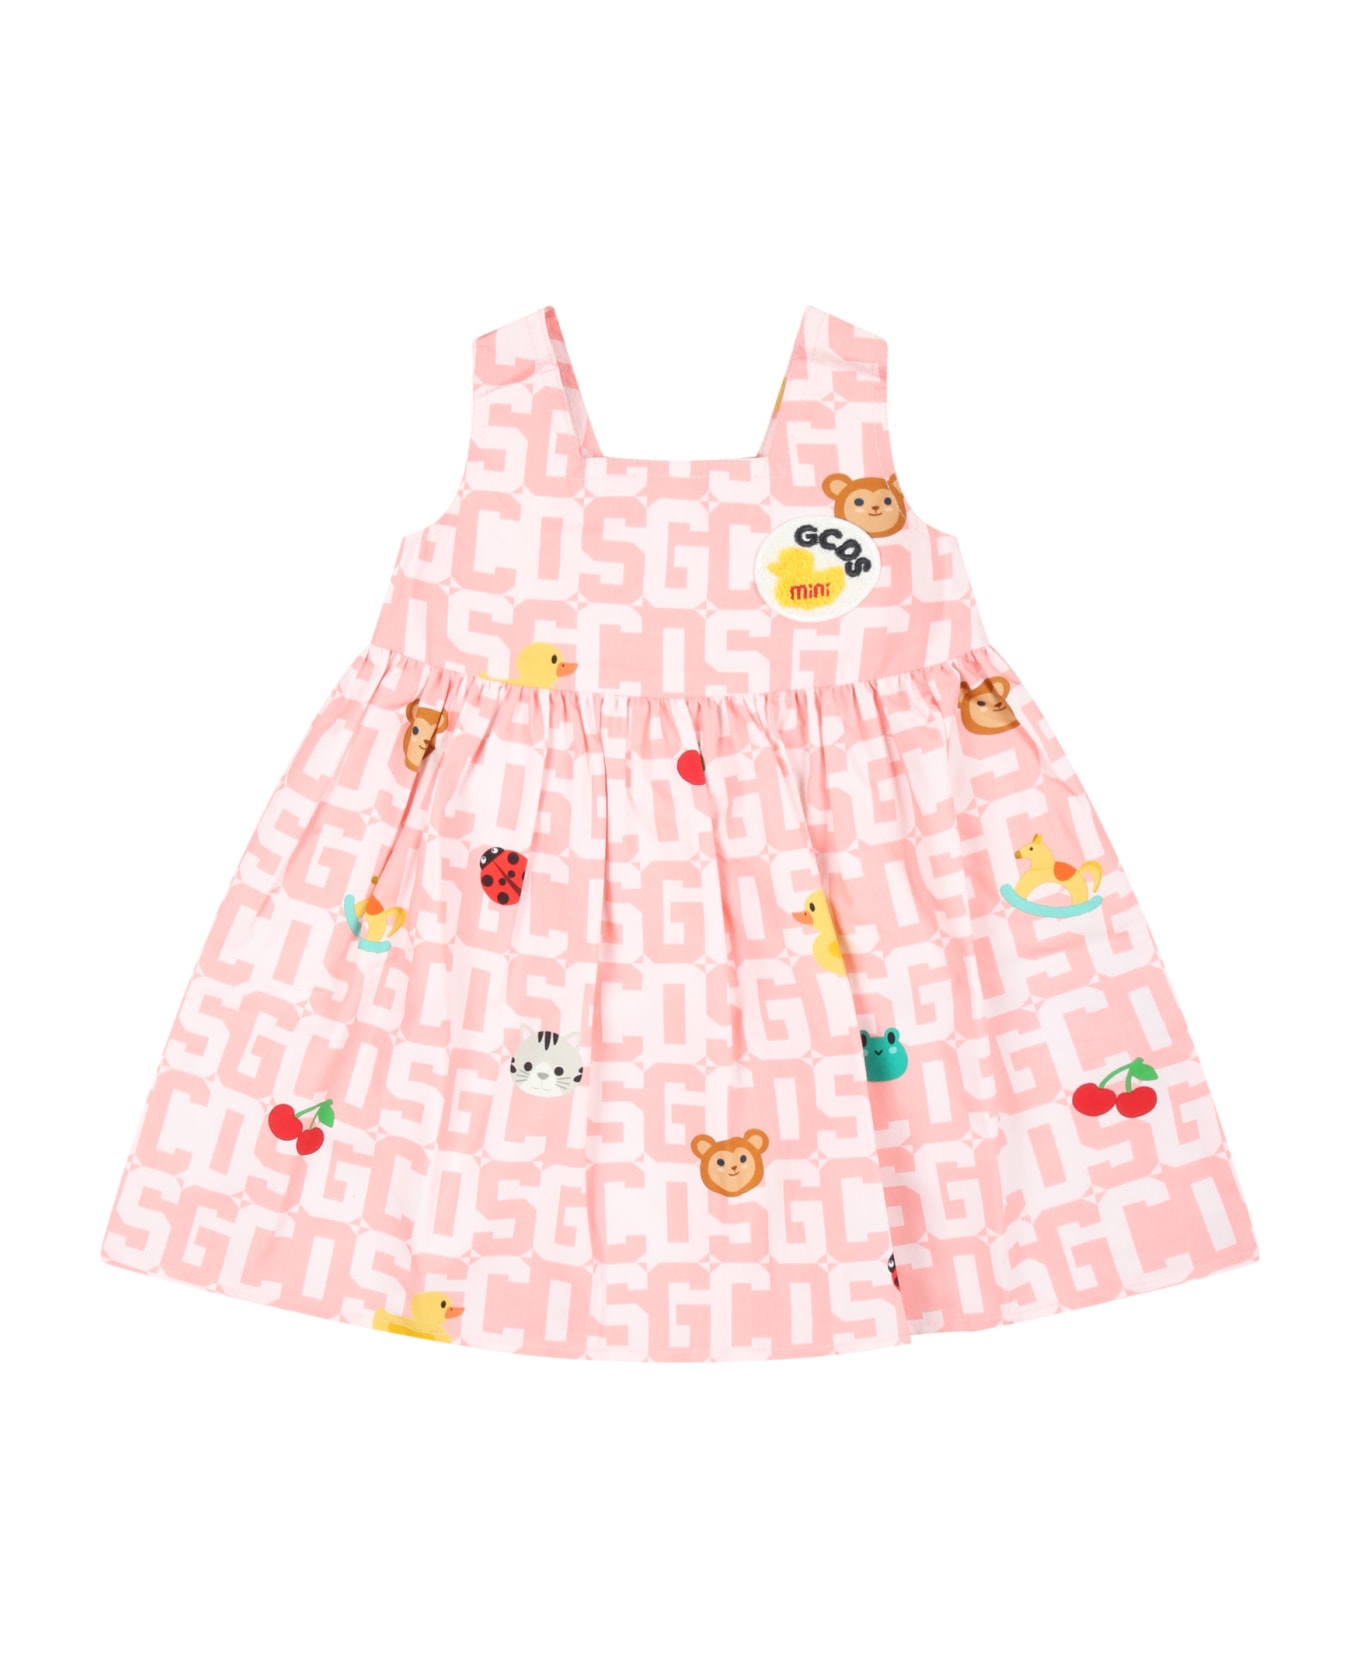 GCDS Mini Pink Dress For Baby Girl With Logo Patch - Pink ワンピース＆ドレス